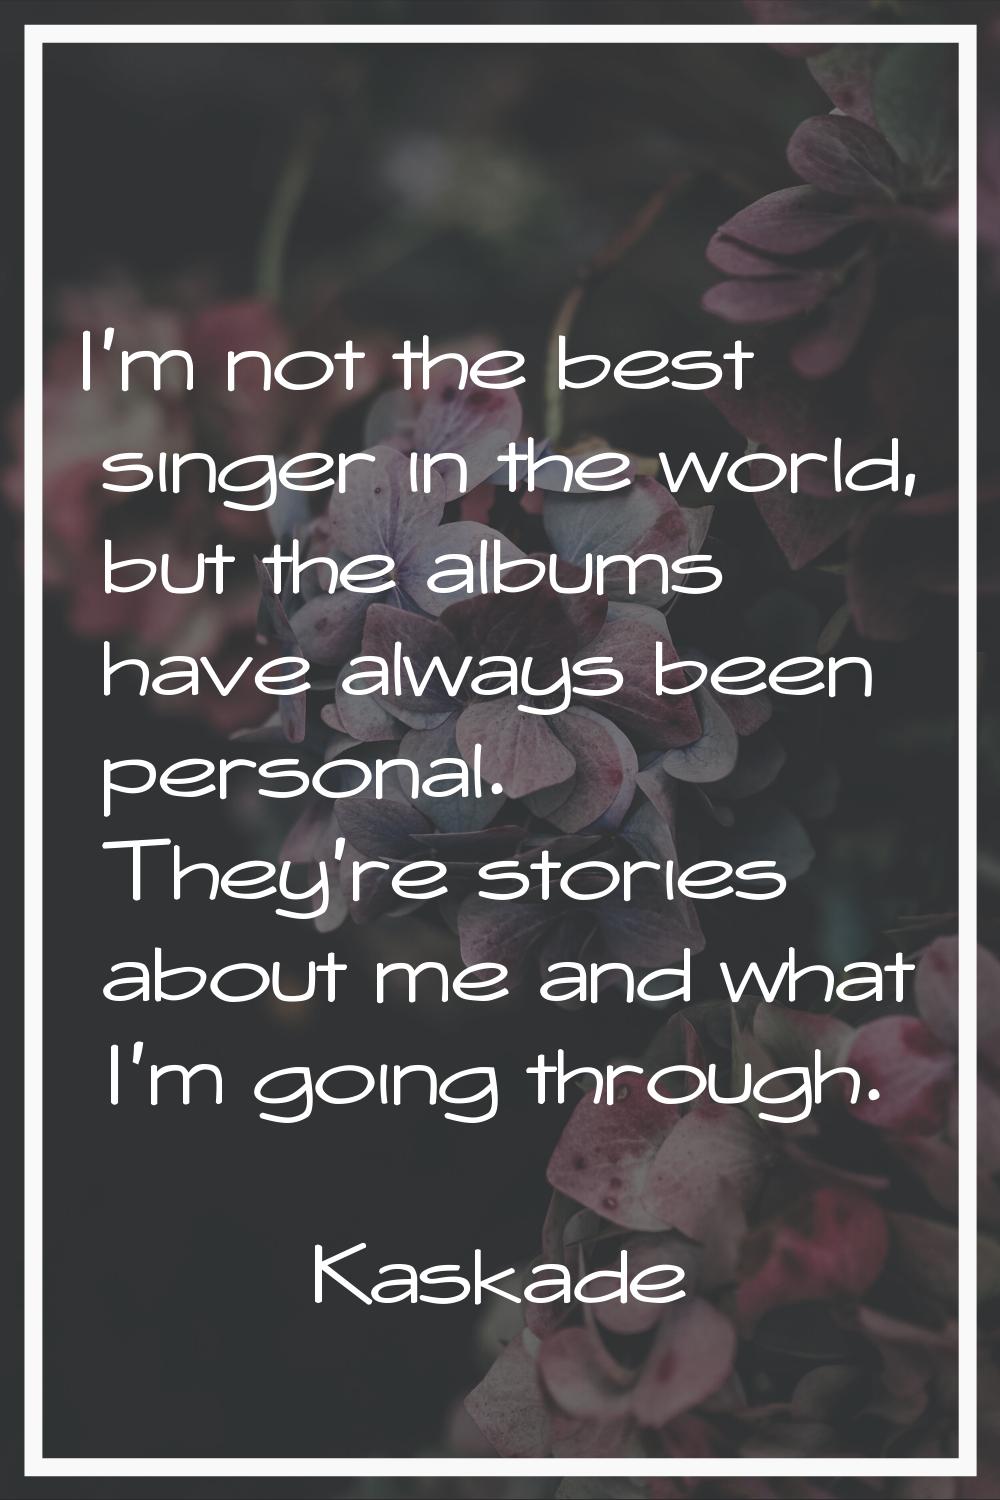 I'm not the best singer in the world, but the albums have always been personal. They're stories abo